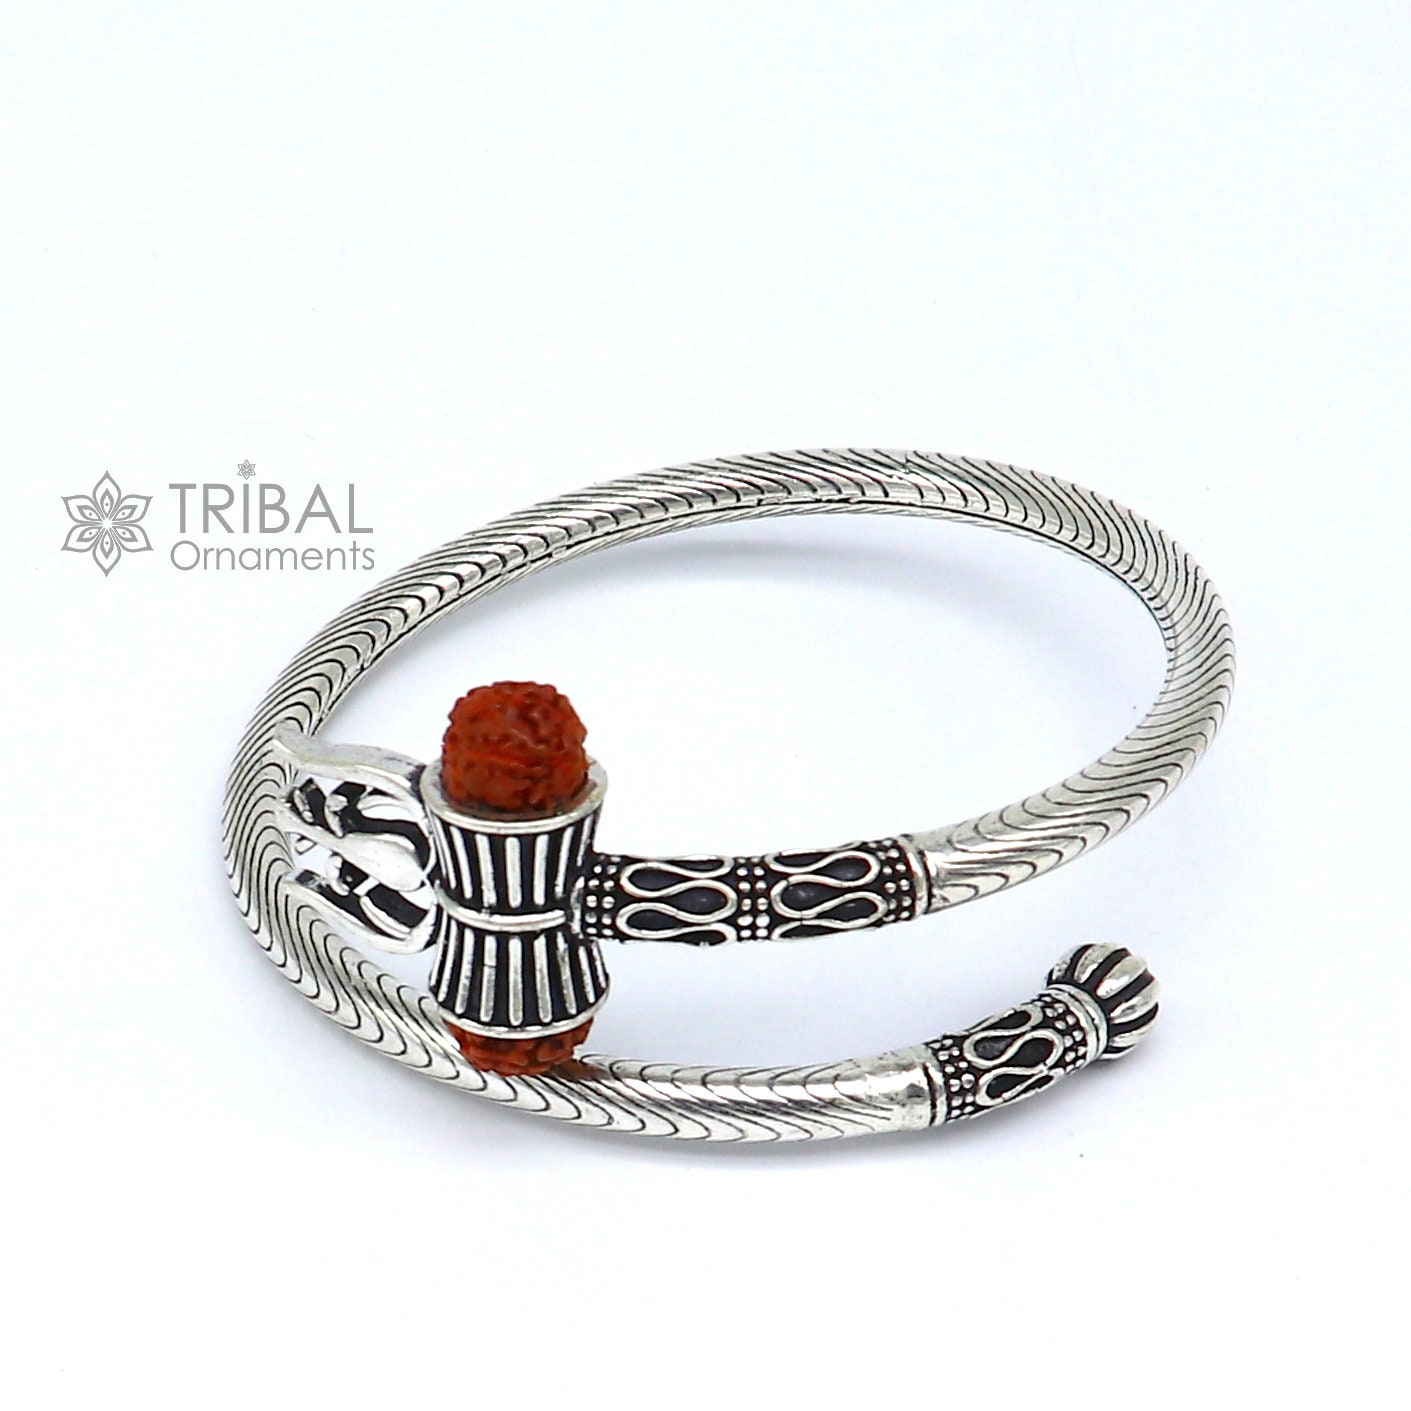 925 sterling silver handmade amazing customized lord shiva bangle bracelet, excellent trident trishul with rudraksha unisex jewelry nsk772 - TRIBAL ORNAMENTS